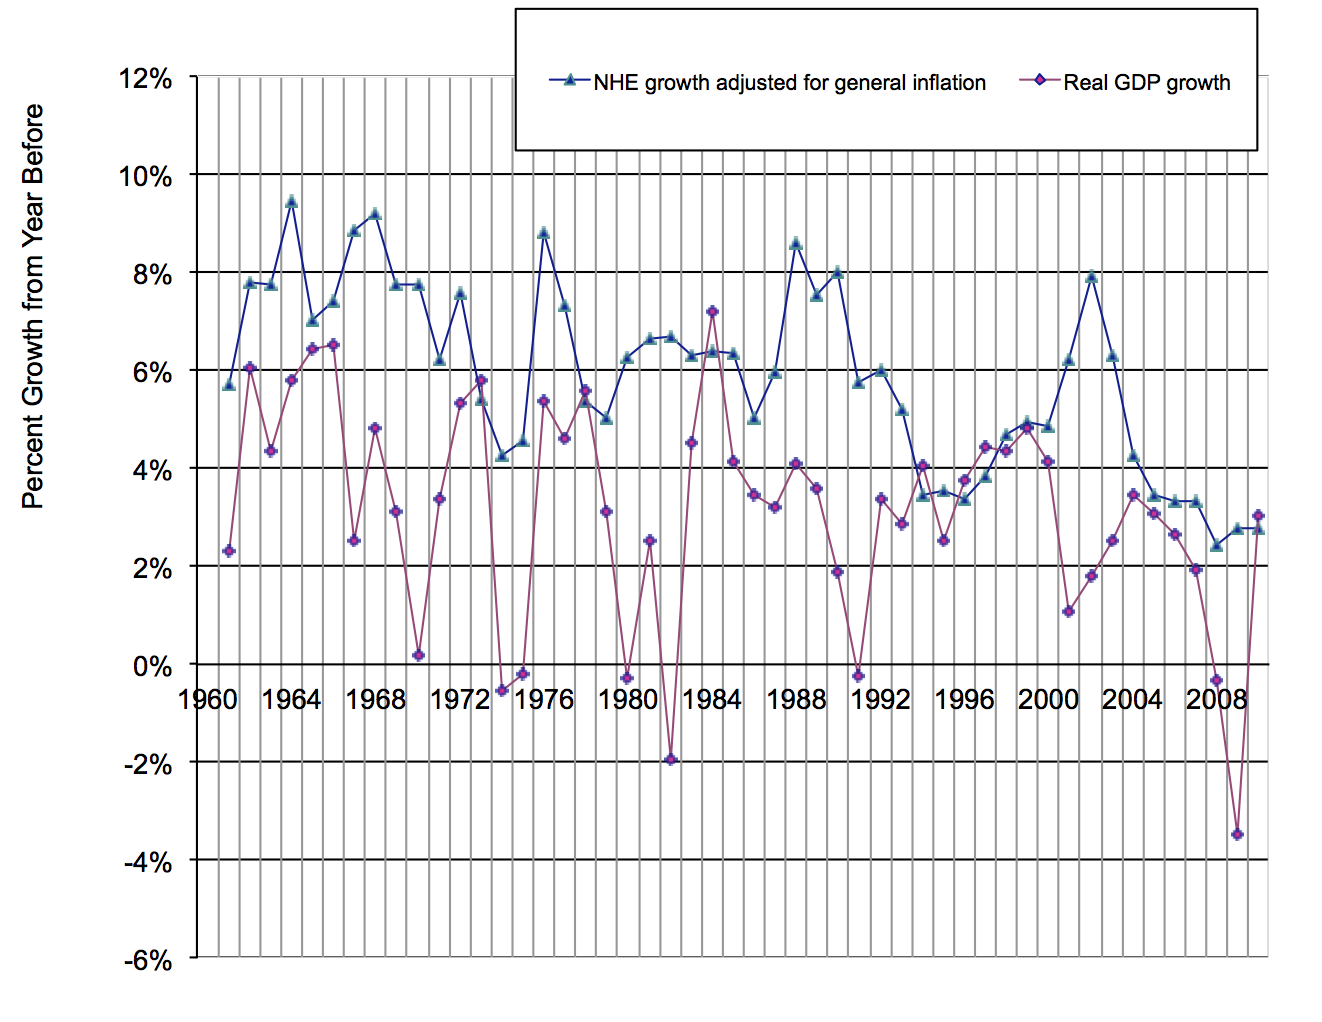 GDP and NHE growth rates adjusted for inflation